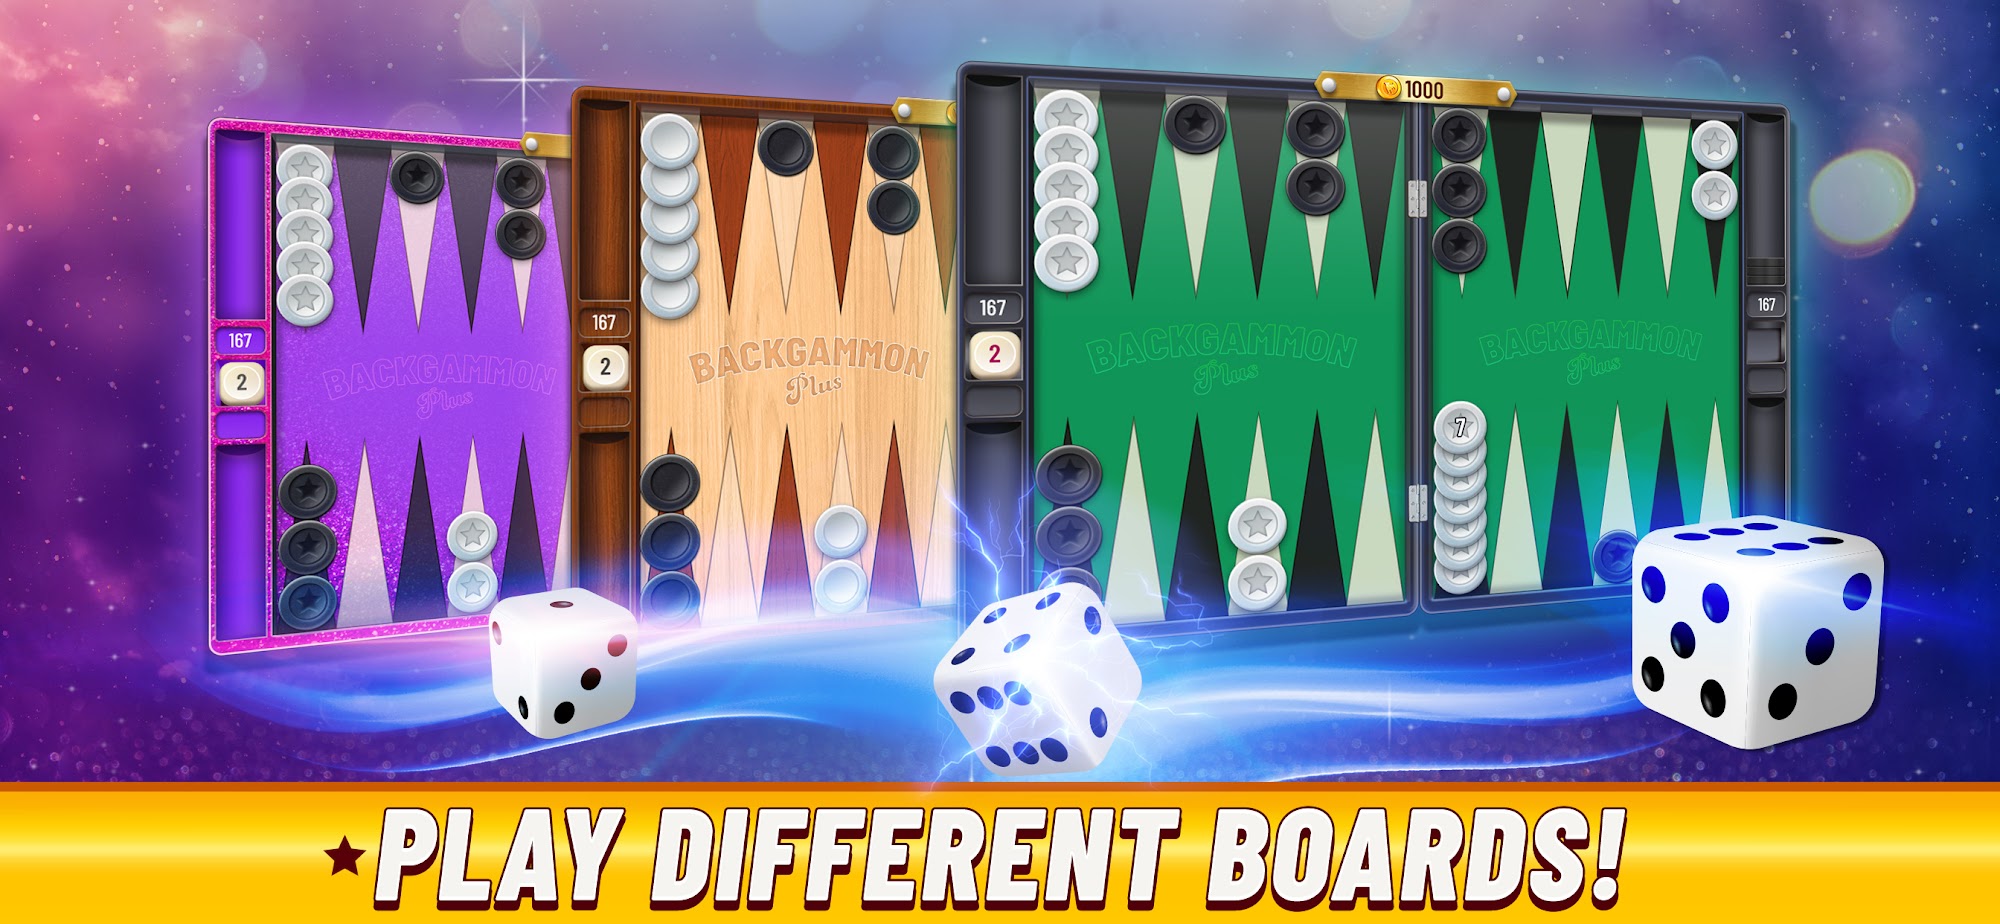 Backgammon Plus - Board Game - Android game screenshots.